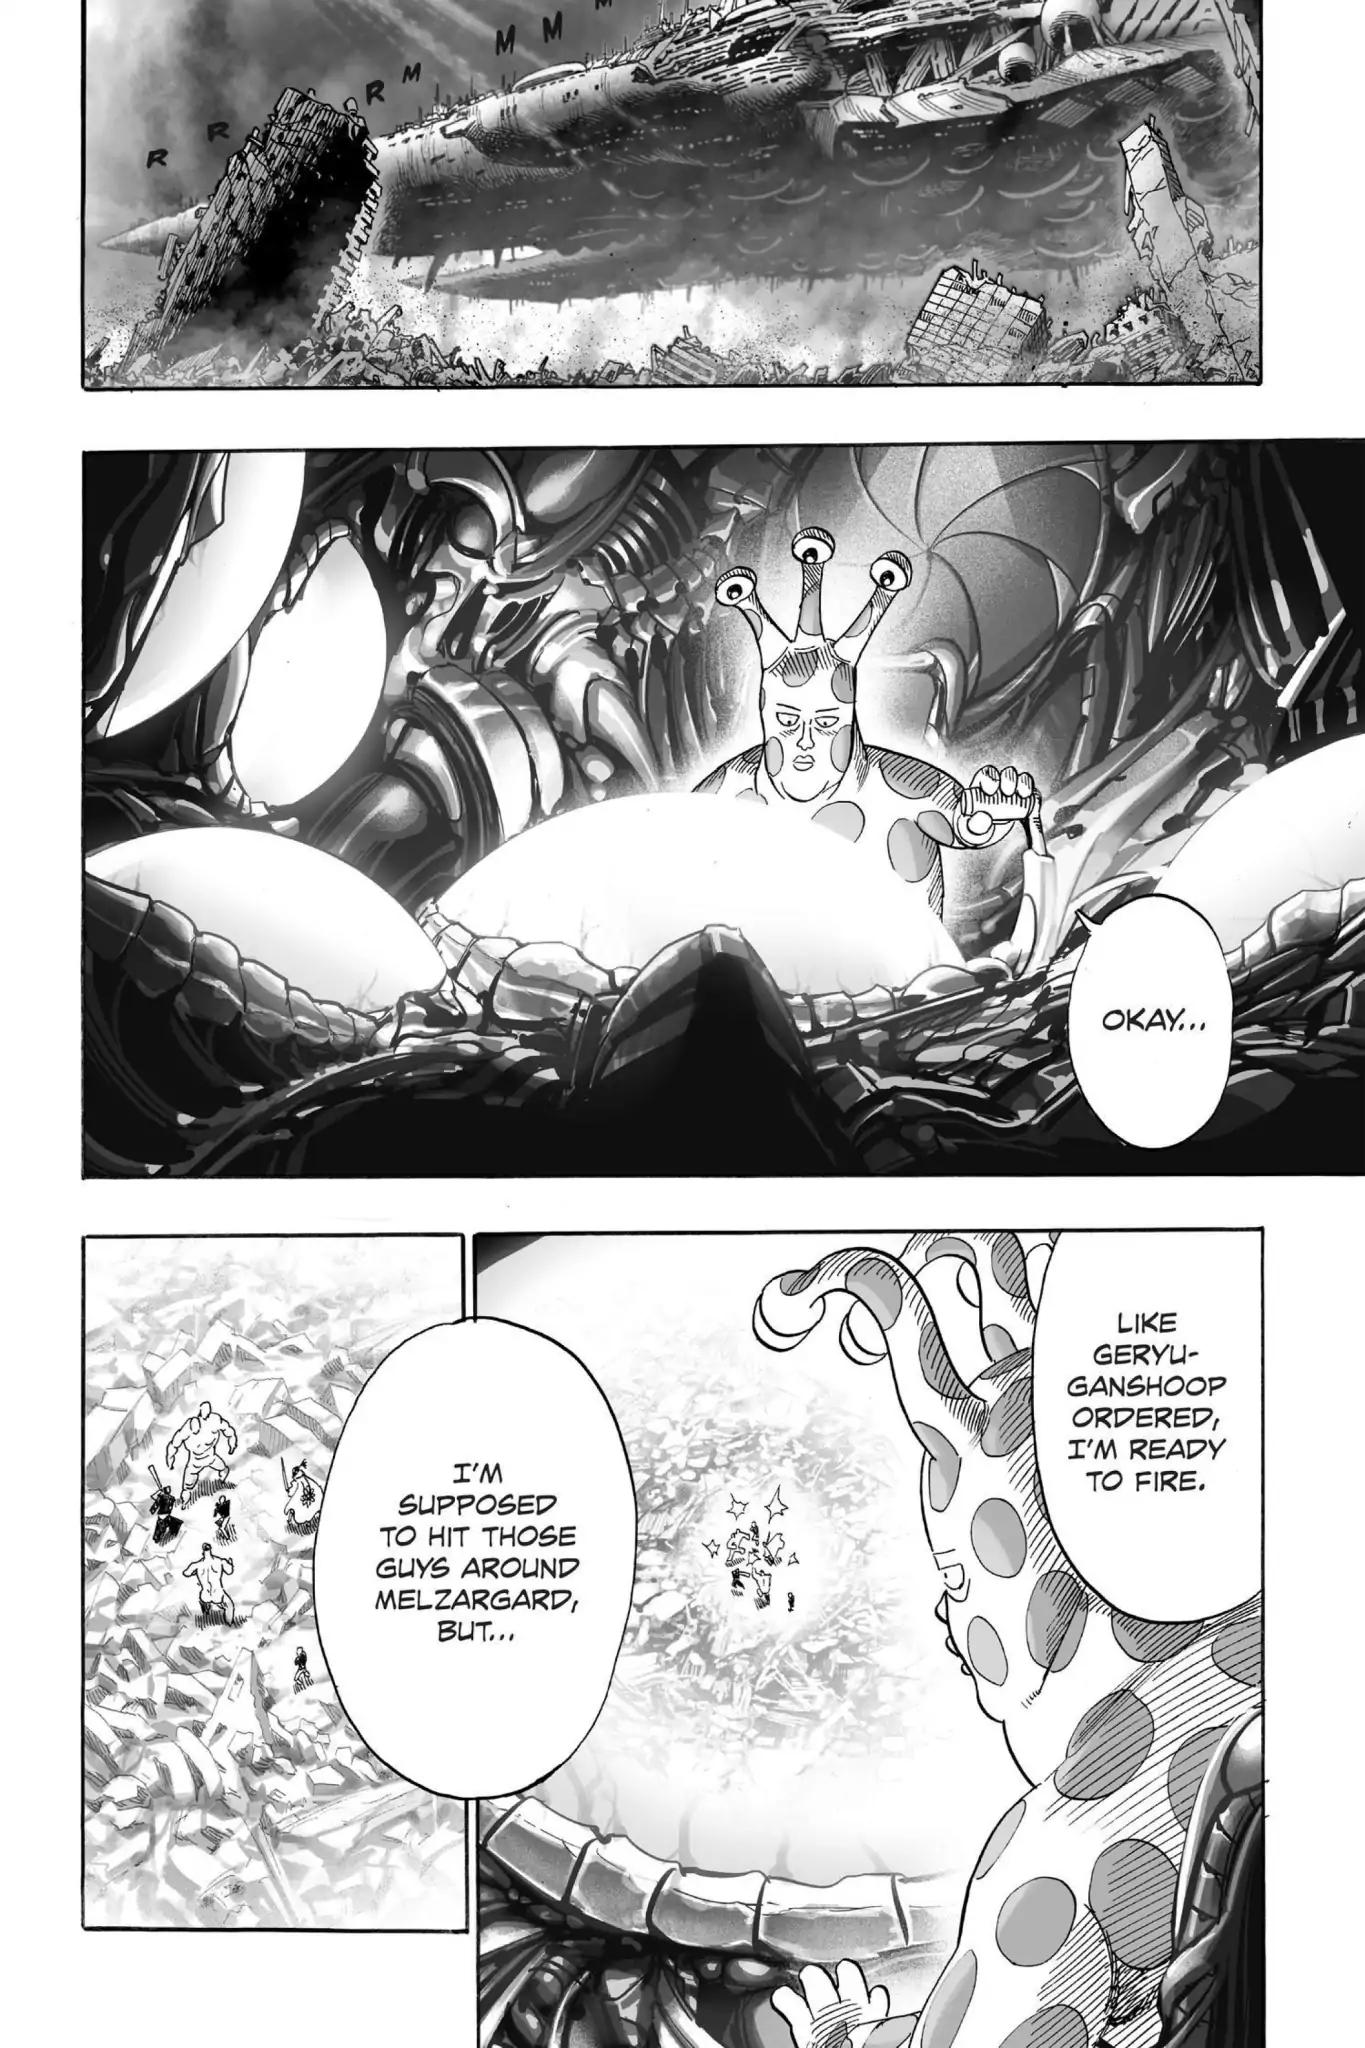 One-Punch Man chapter 34 page 17